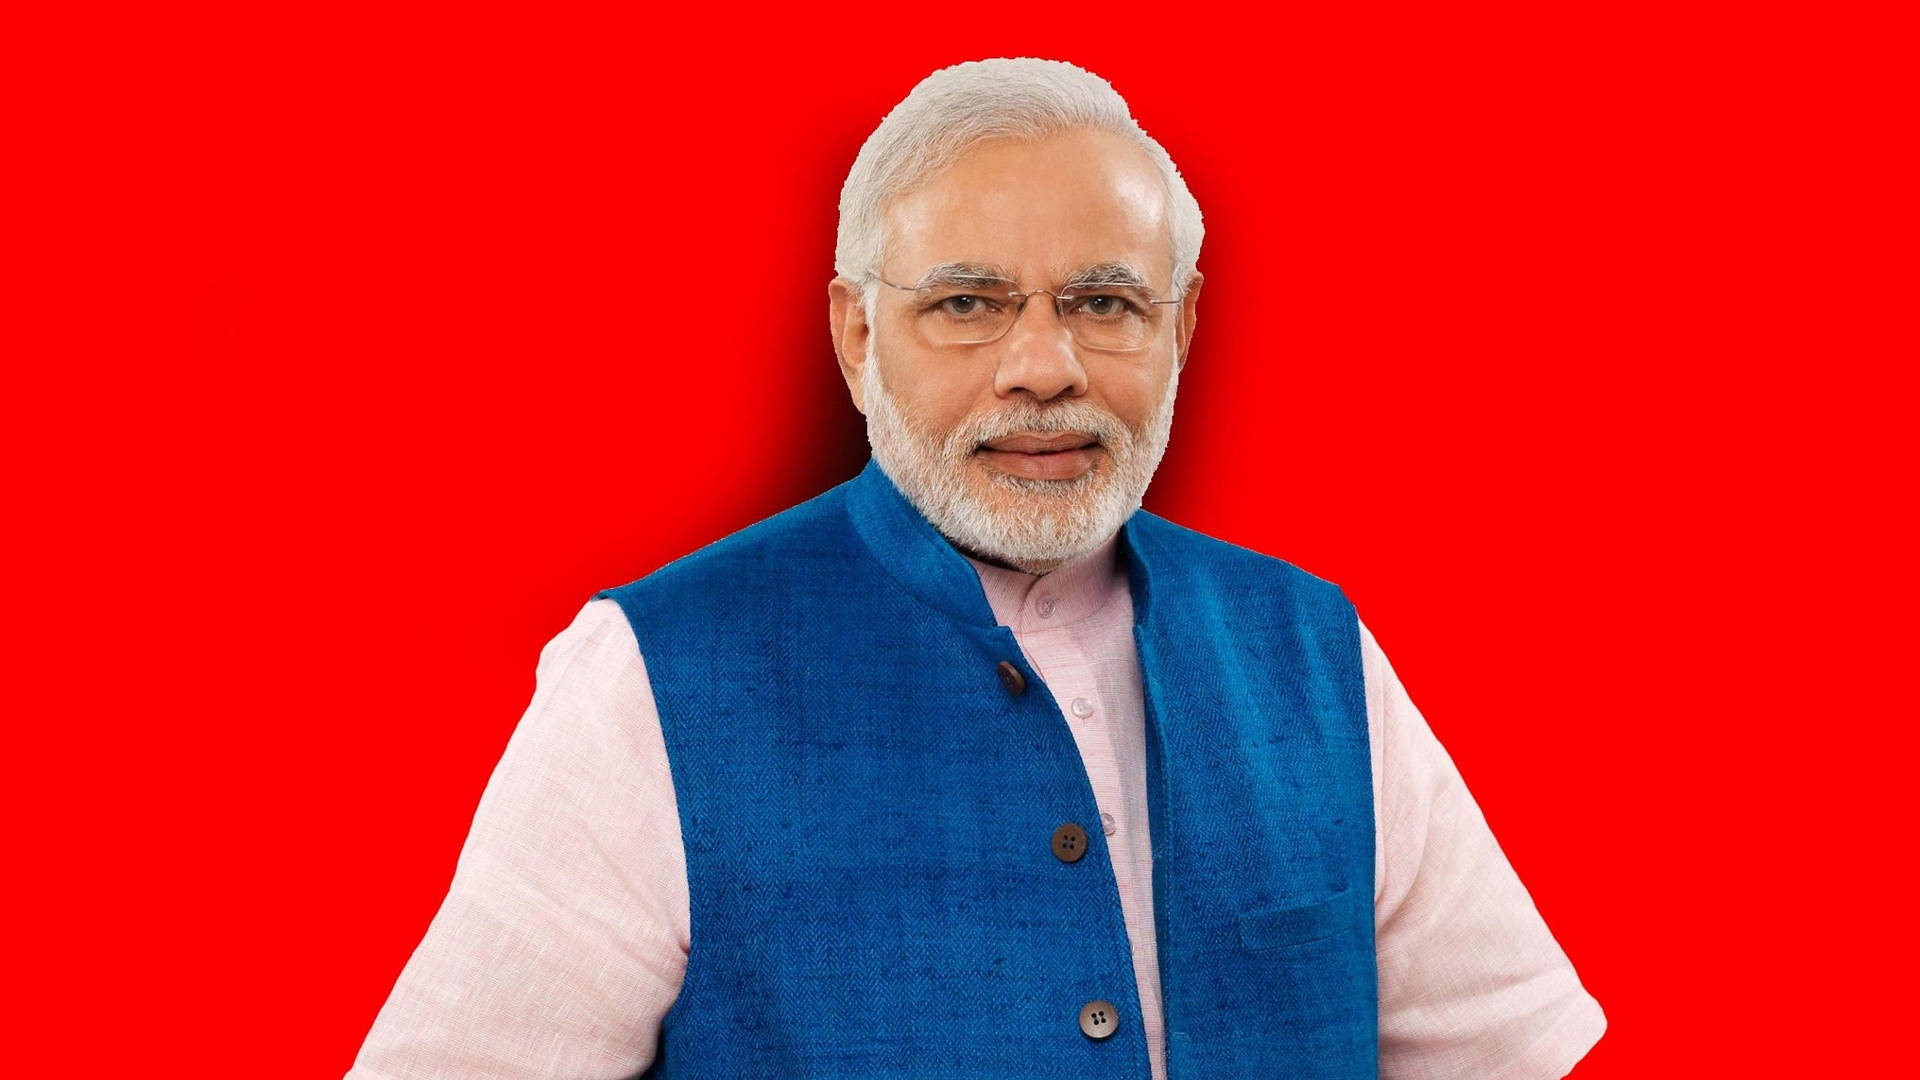 Indian Prime Minister Narendra Modi On A Red Background